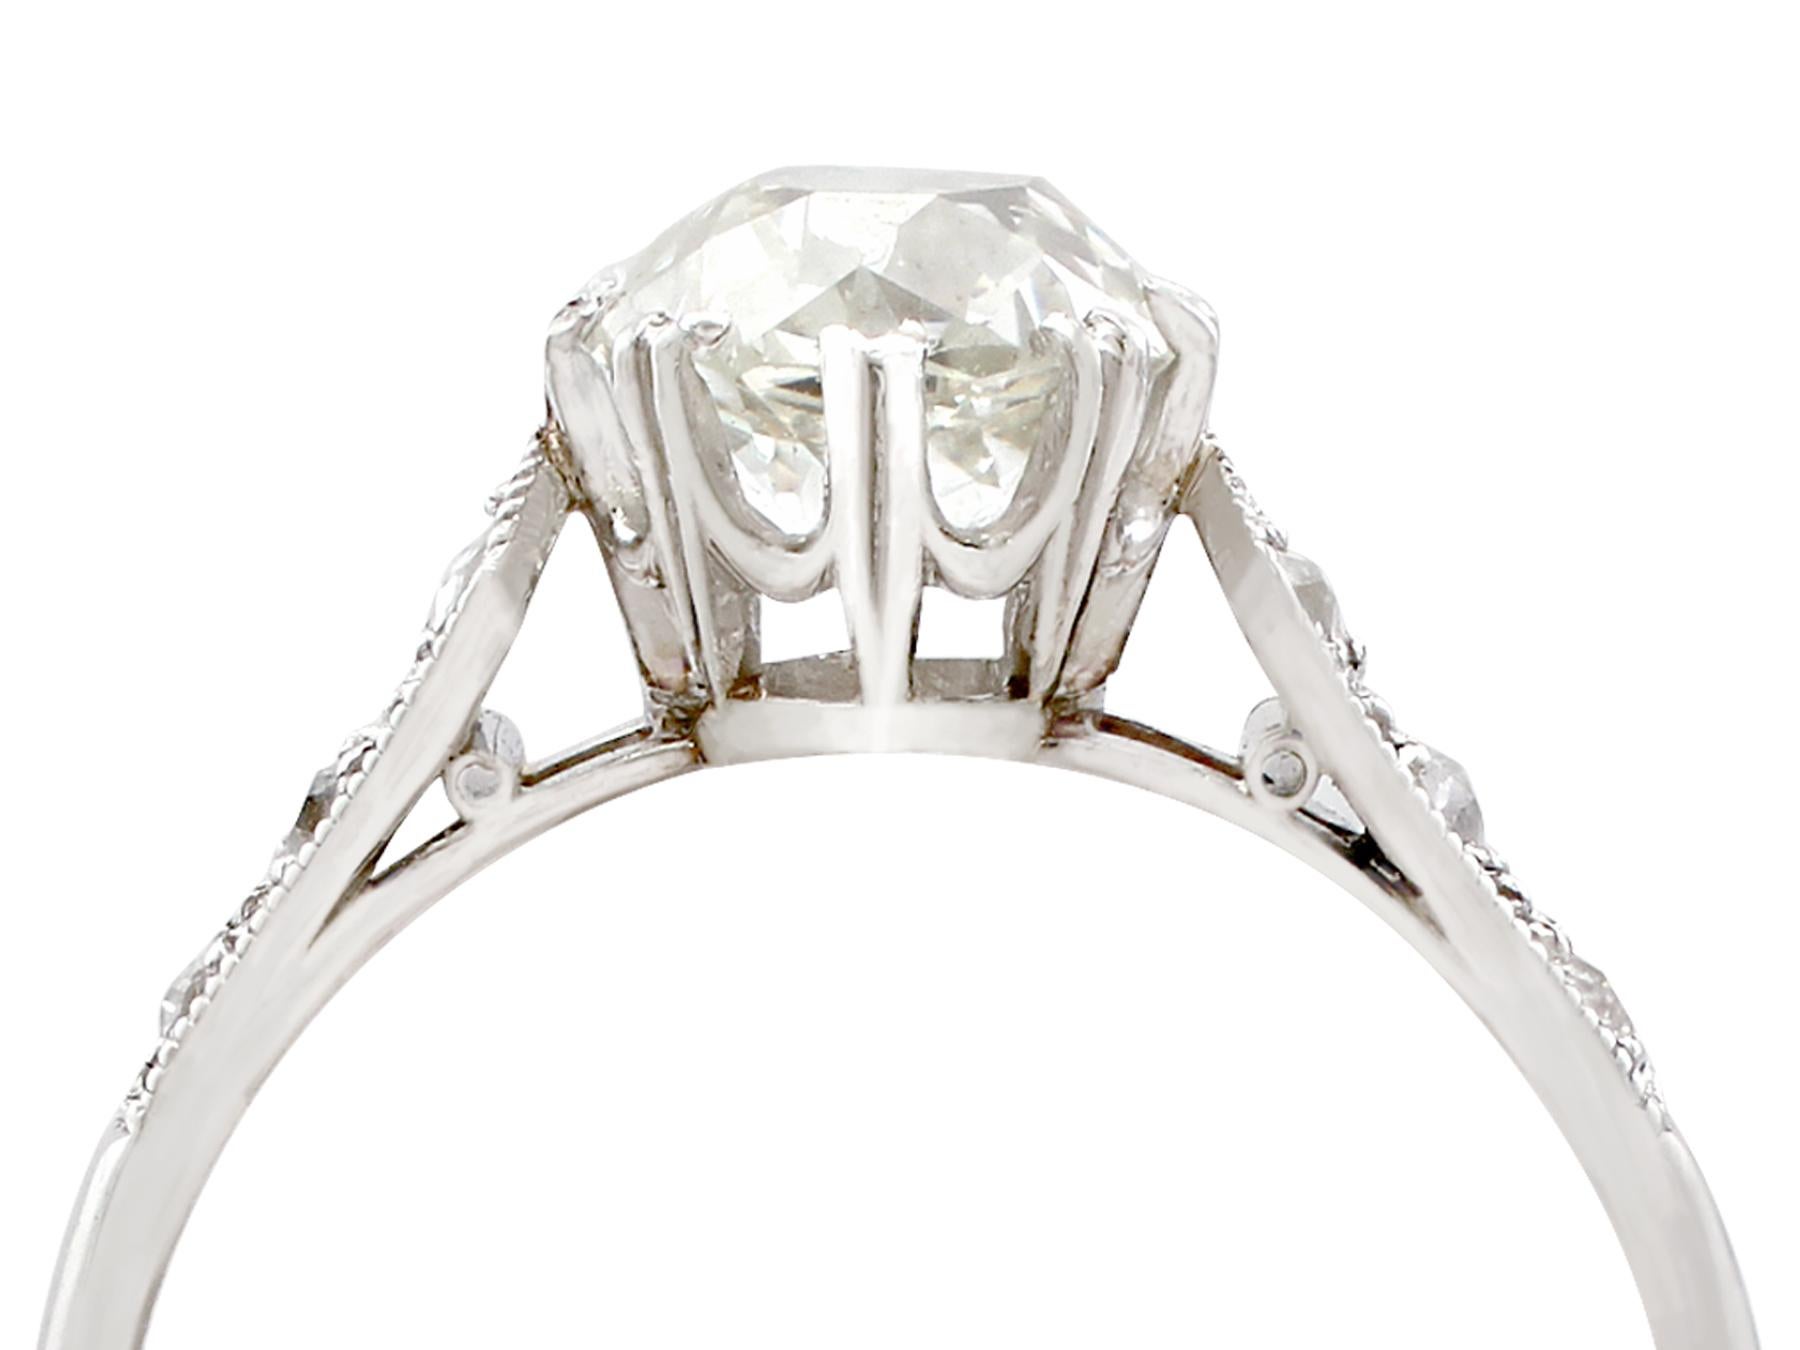 An impressive antique 1930's 1.55 carat diamond and platinum solitaire style engagement ring; part of our diverse antique jewelry collections.

This stunning, fine and impressive 1.40ct diamond engagement ring has been crafted in platinum.

The